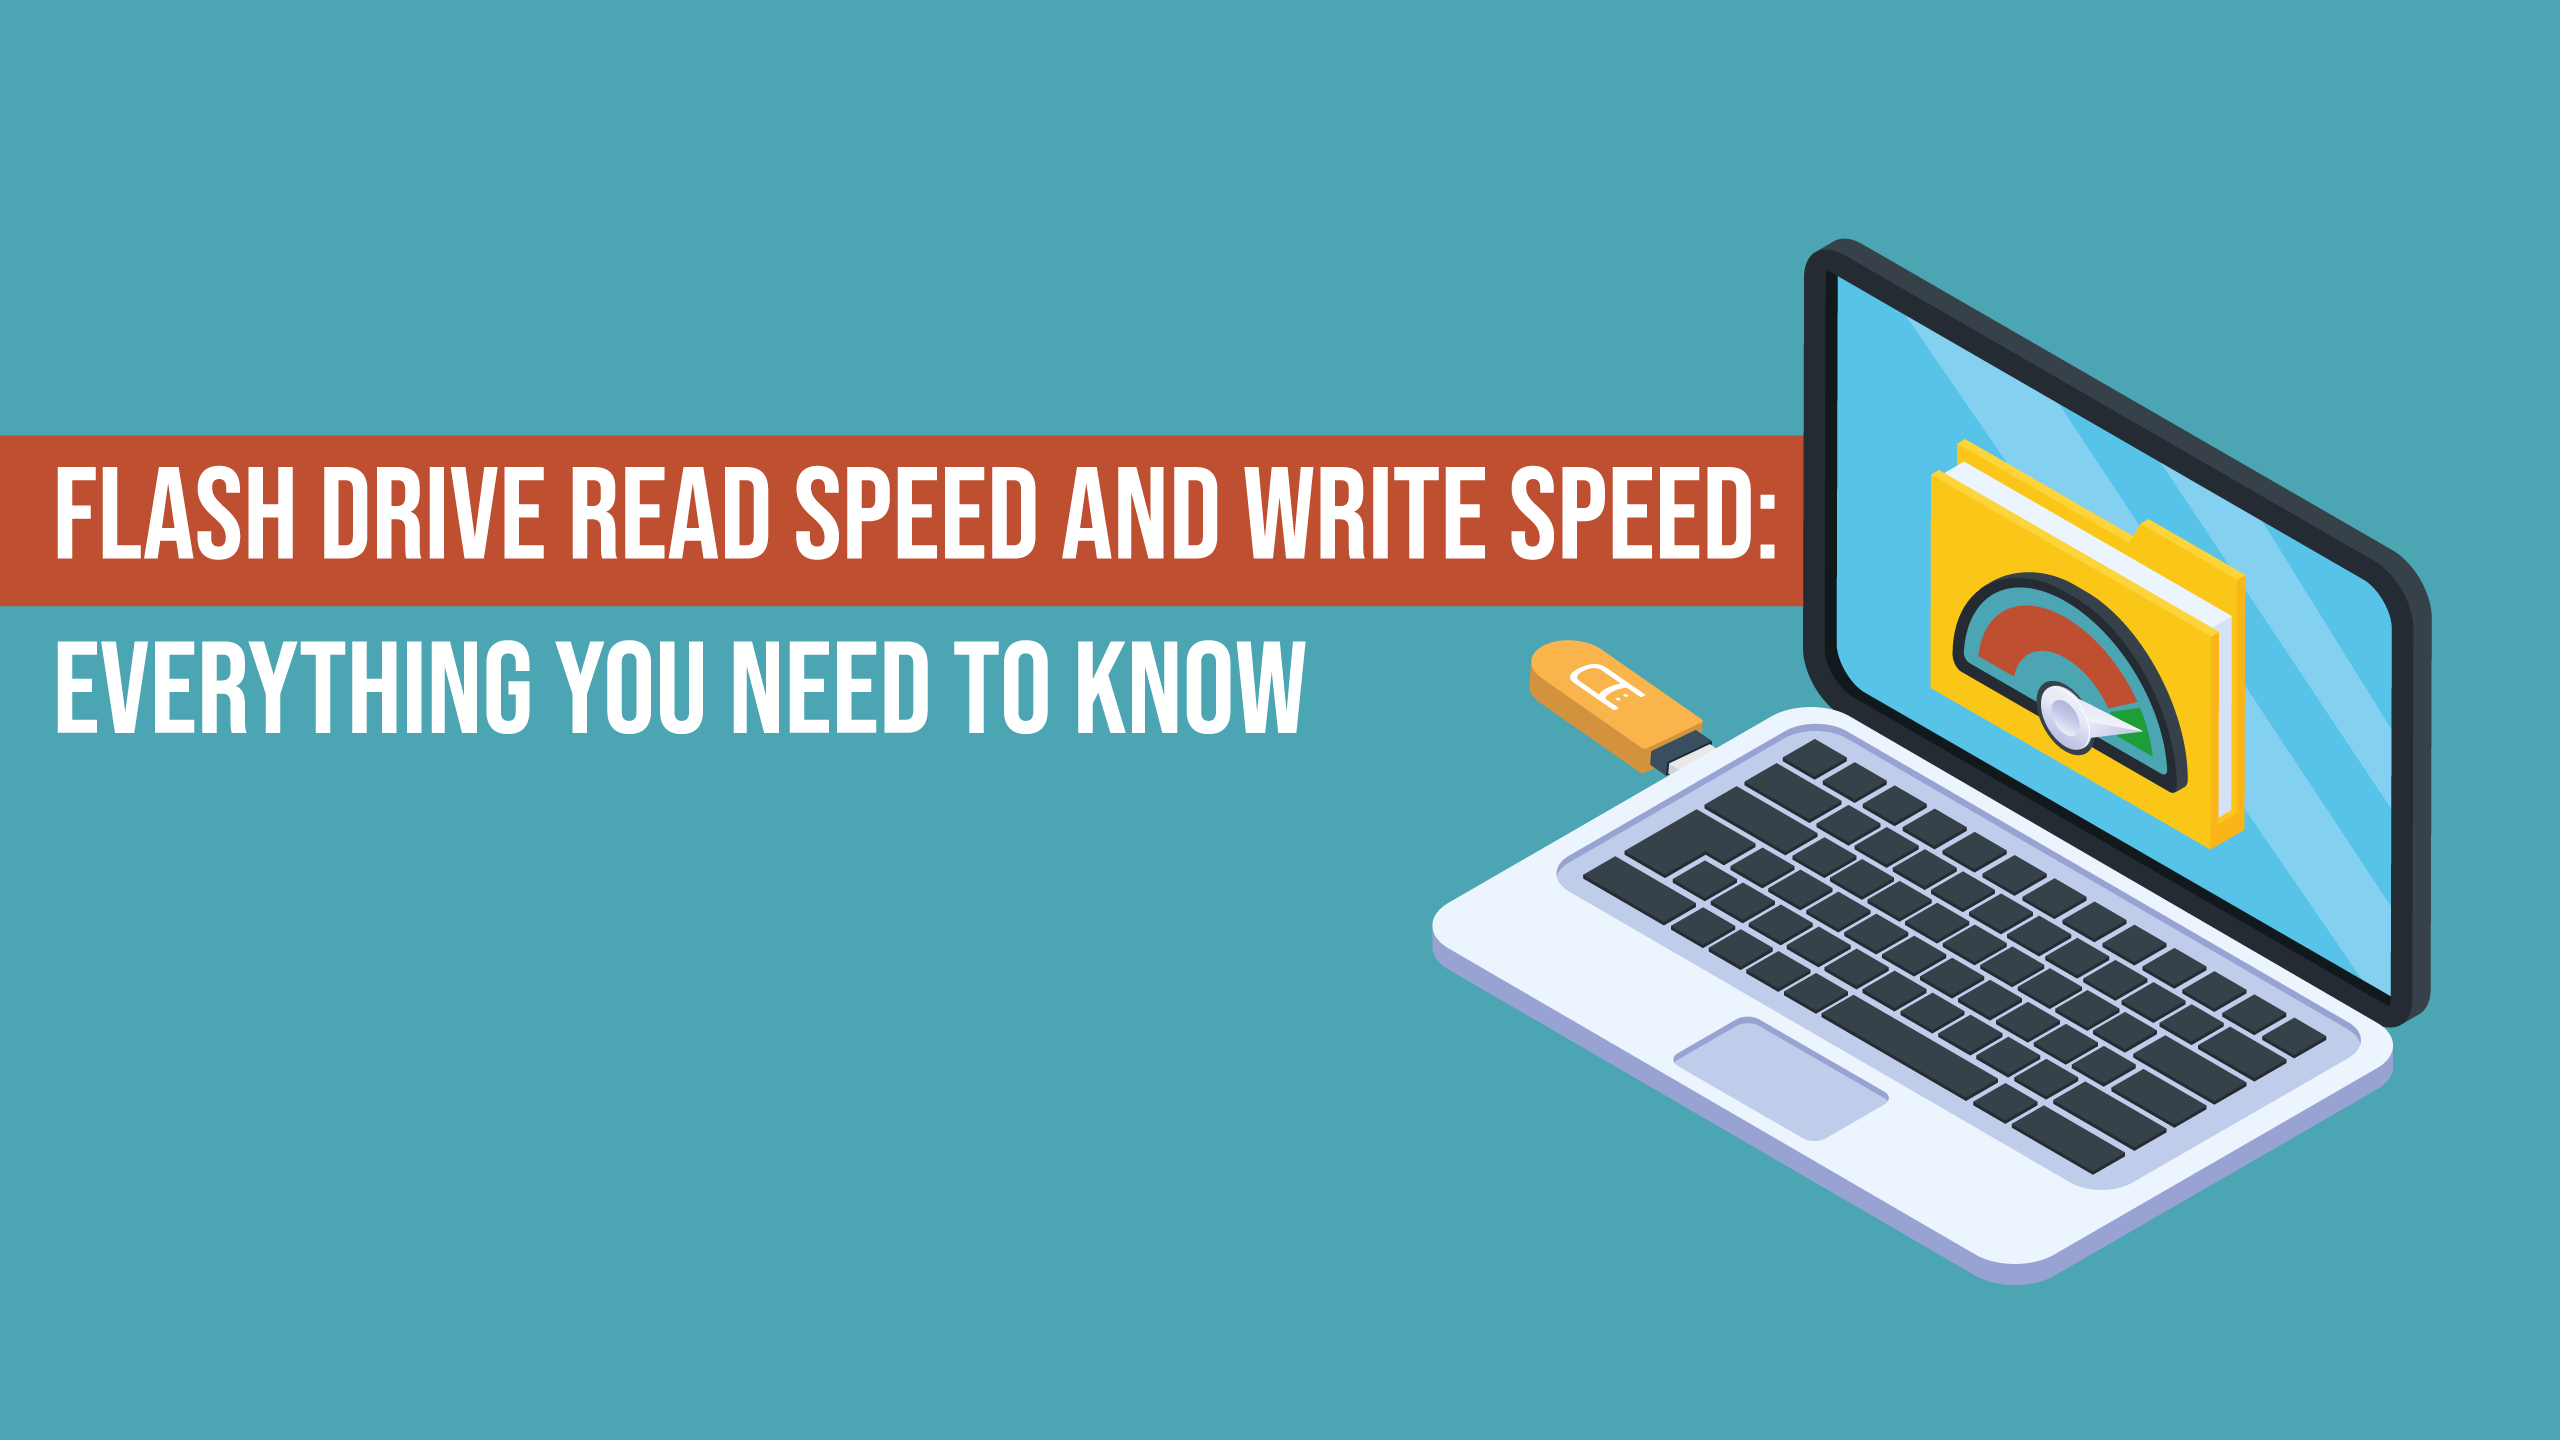 Flash Drive Read Speed and Write Speed: Everything You Need to Know